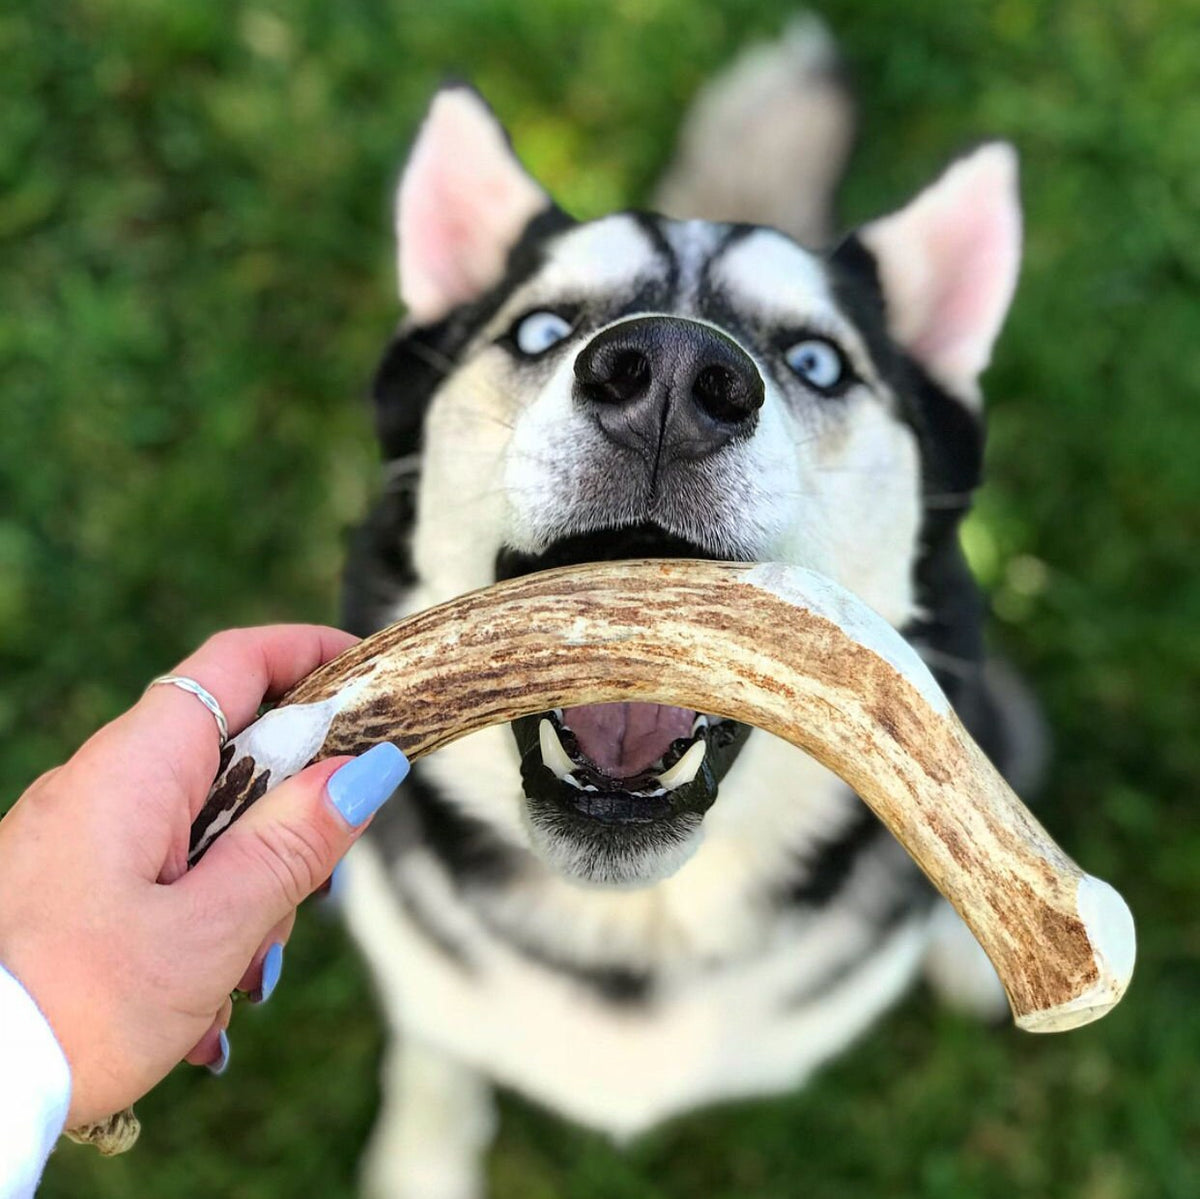 Deer Antler Dog Chew - All Natural, Grade A, Premium Antler Dog Treats, Organic Dog Chews, Naturally Shed Antlers from USA